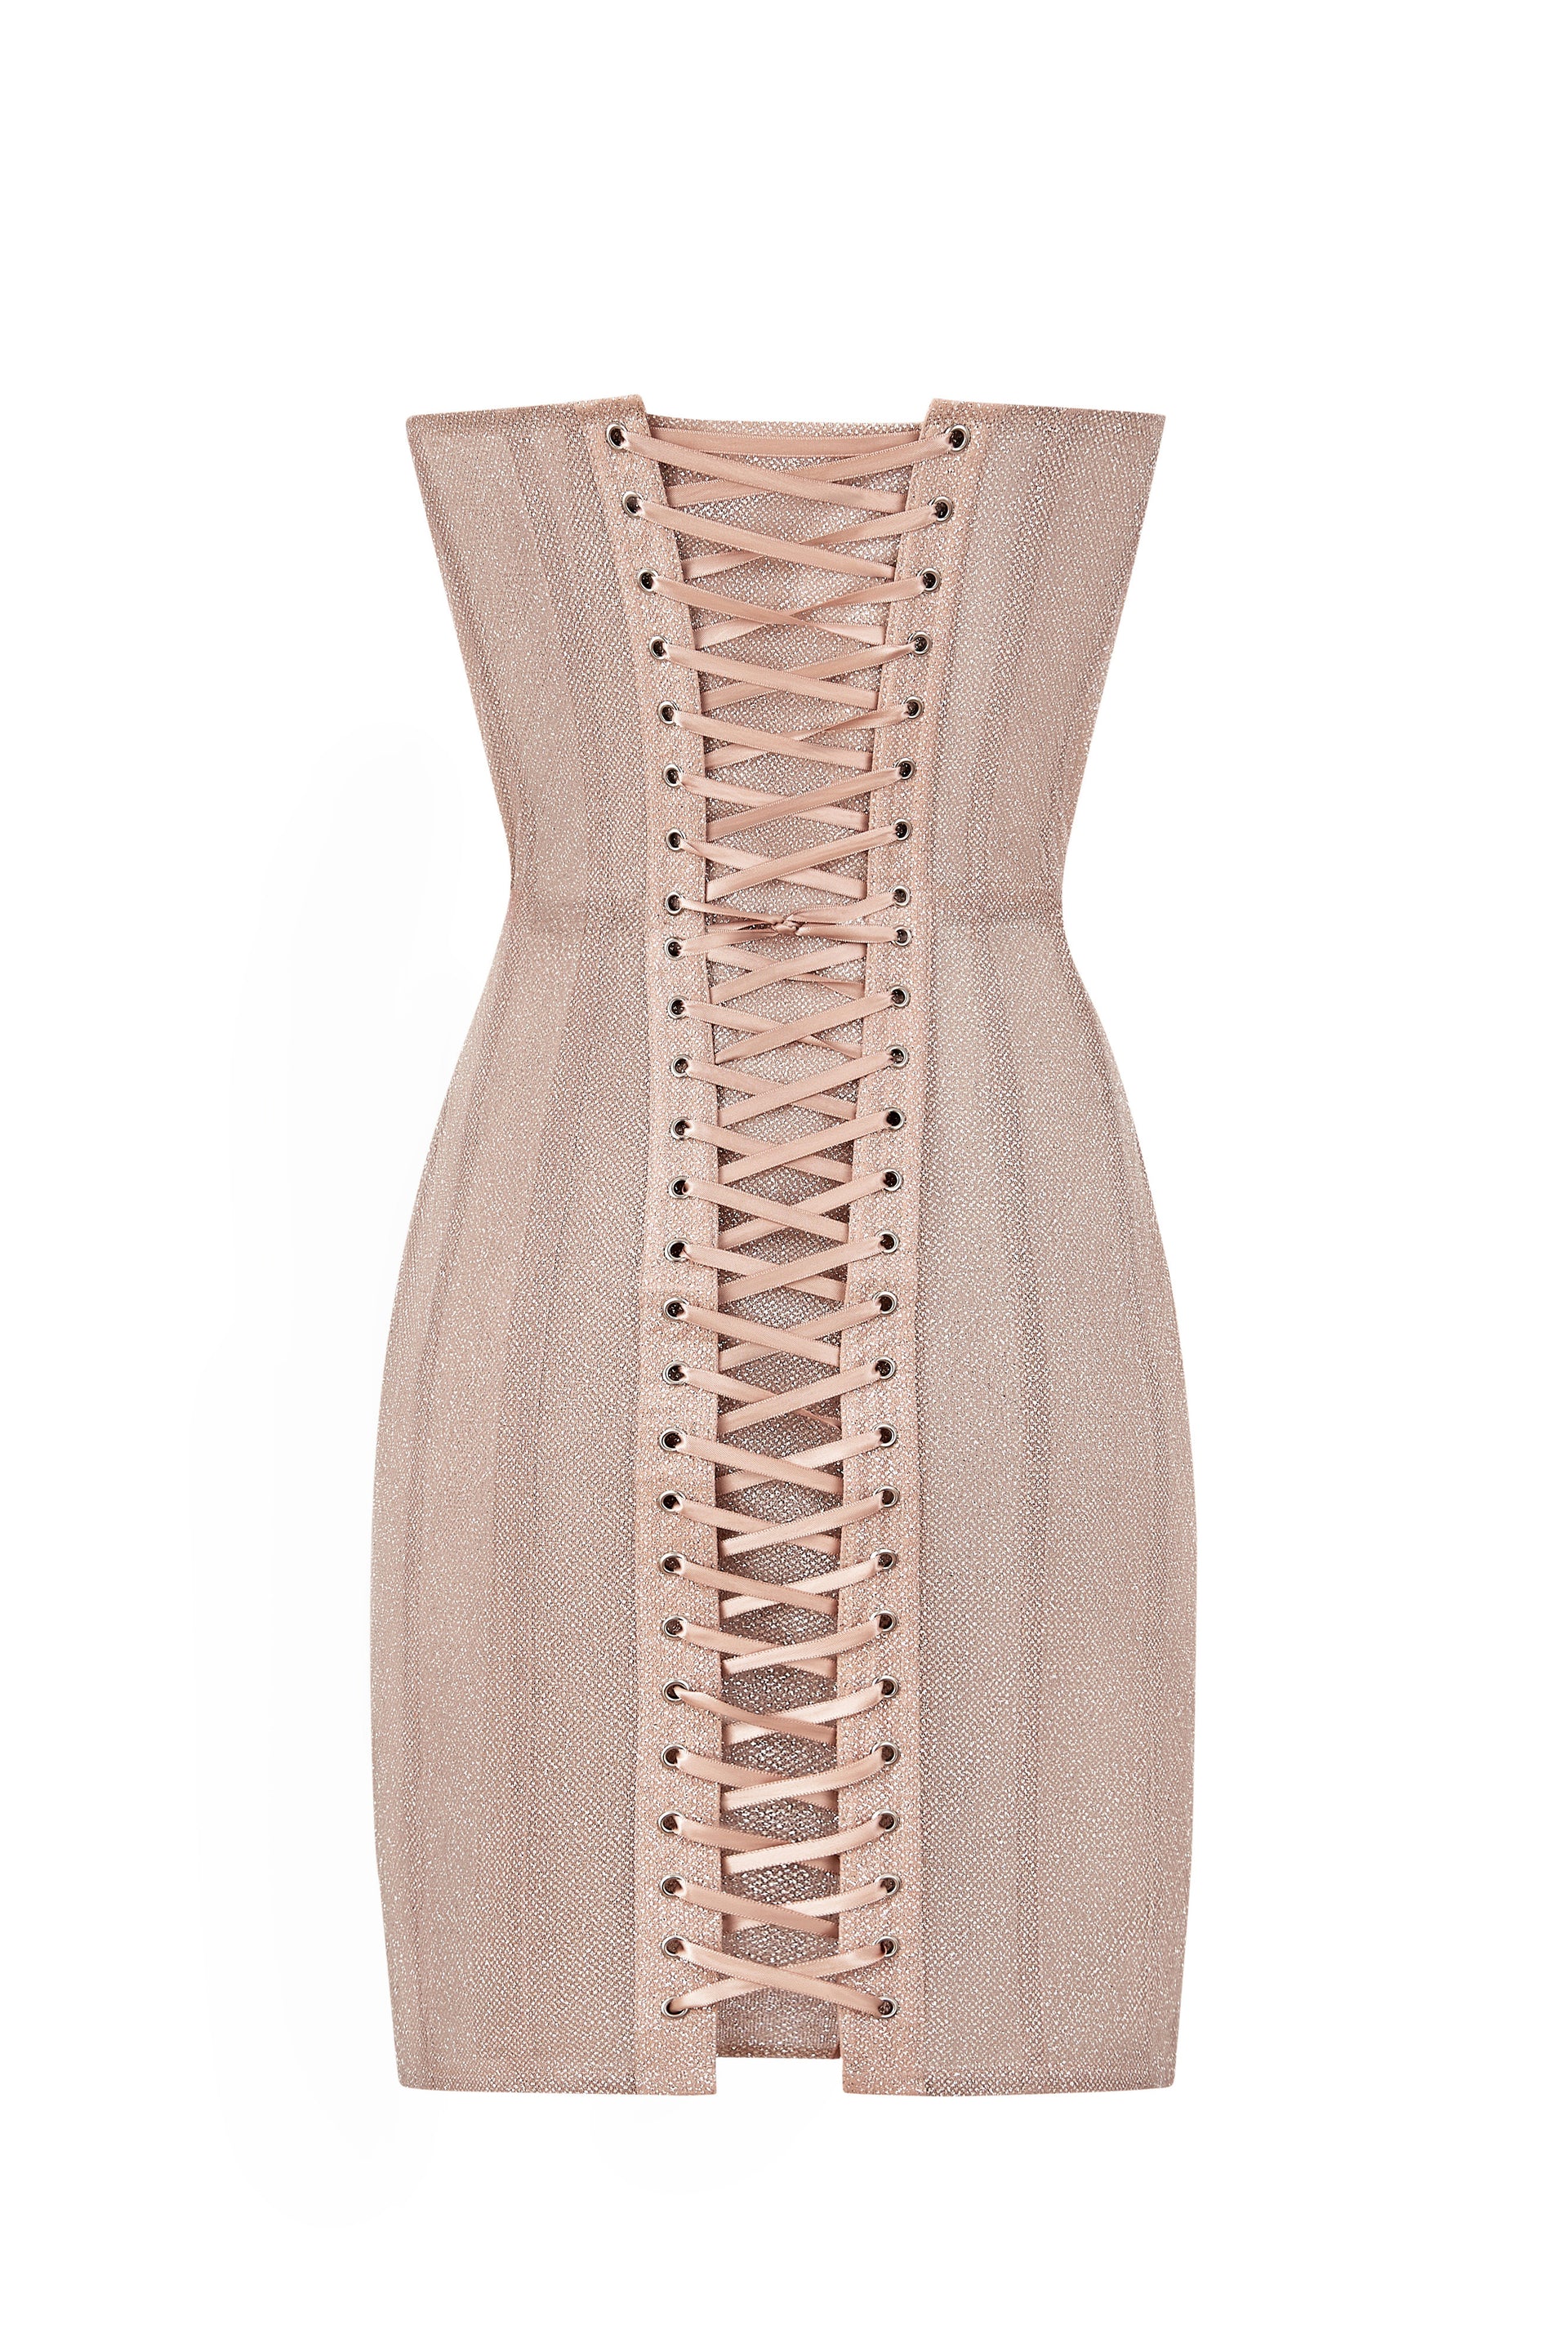 Shiny beige corset dress with cups